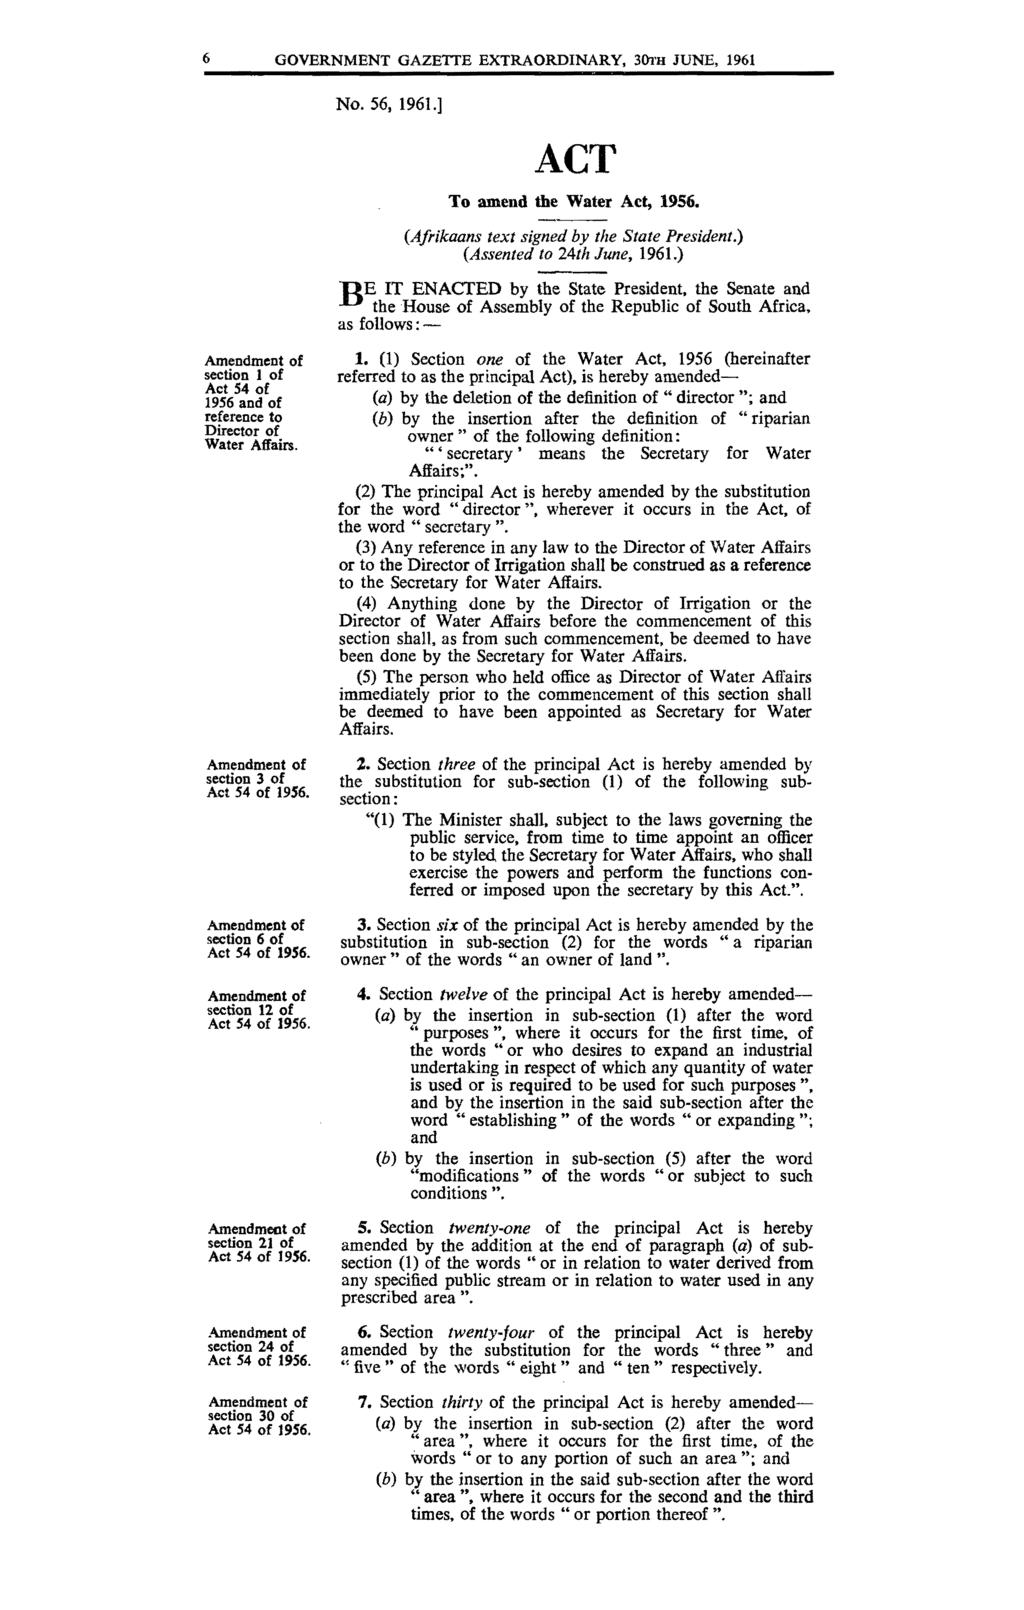 6 GOVERNMENT GAZETTE EXTRAORDINARY, 30'l'H JUNE, 1961 No. 56, 1961.] ACT To amend the Water Act, 1956. (Afrikaans text signed by the State President.) (Assented to 24th June, 1961.